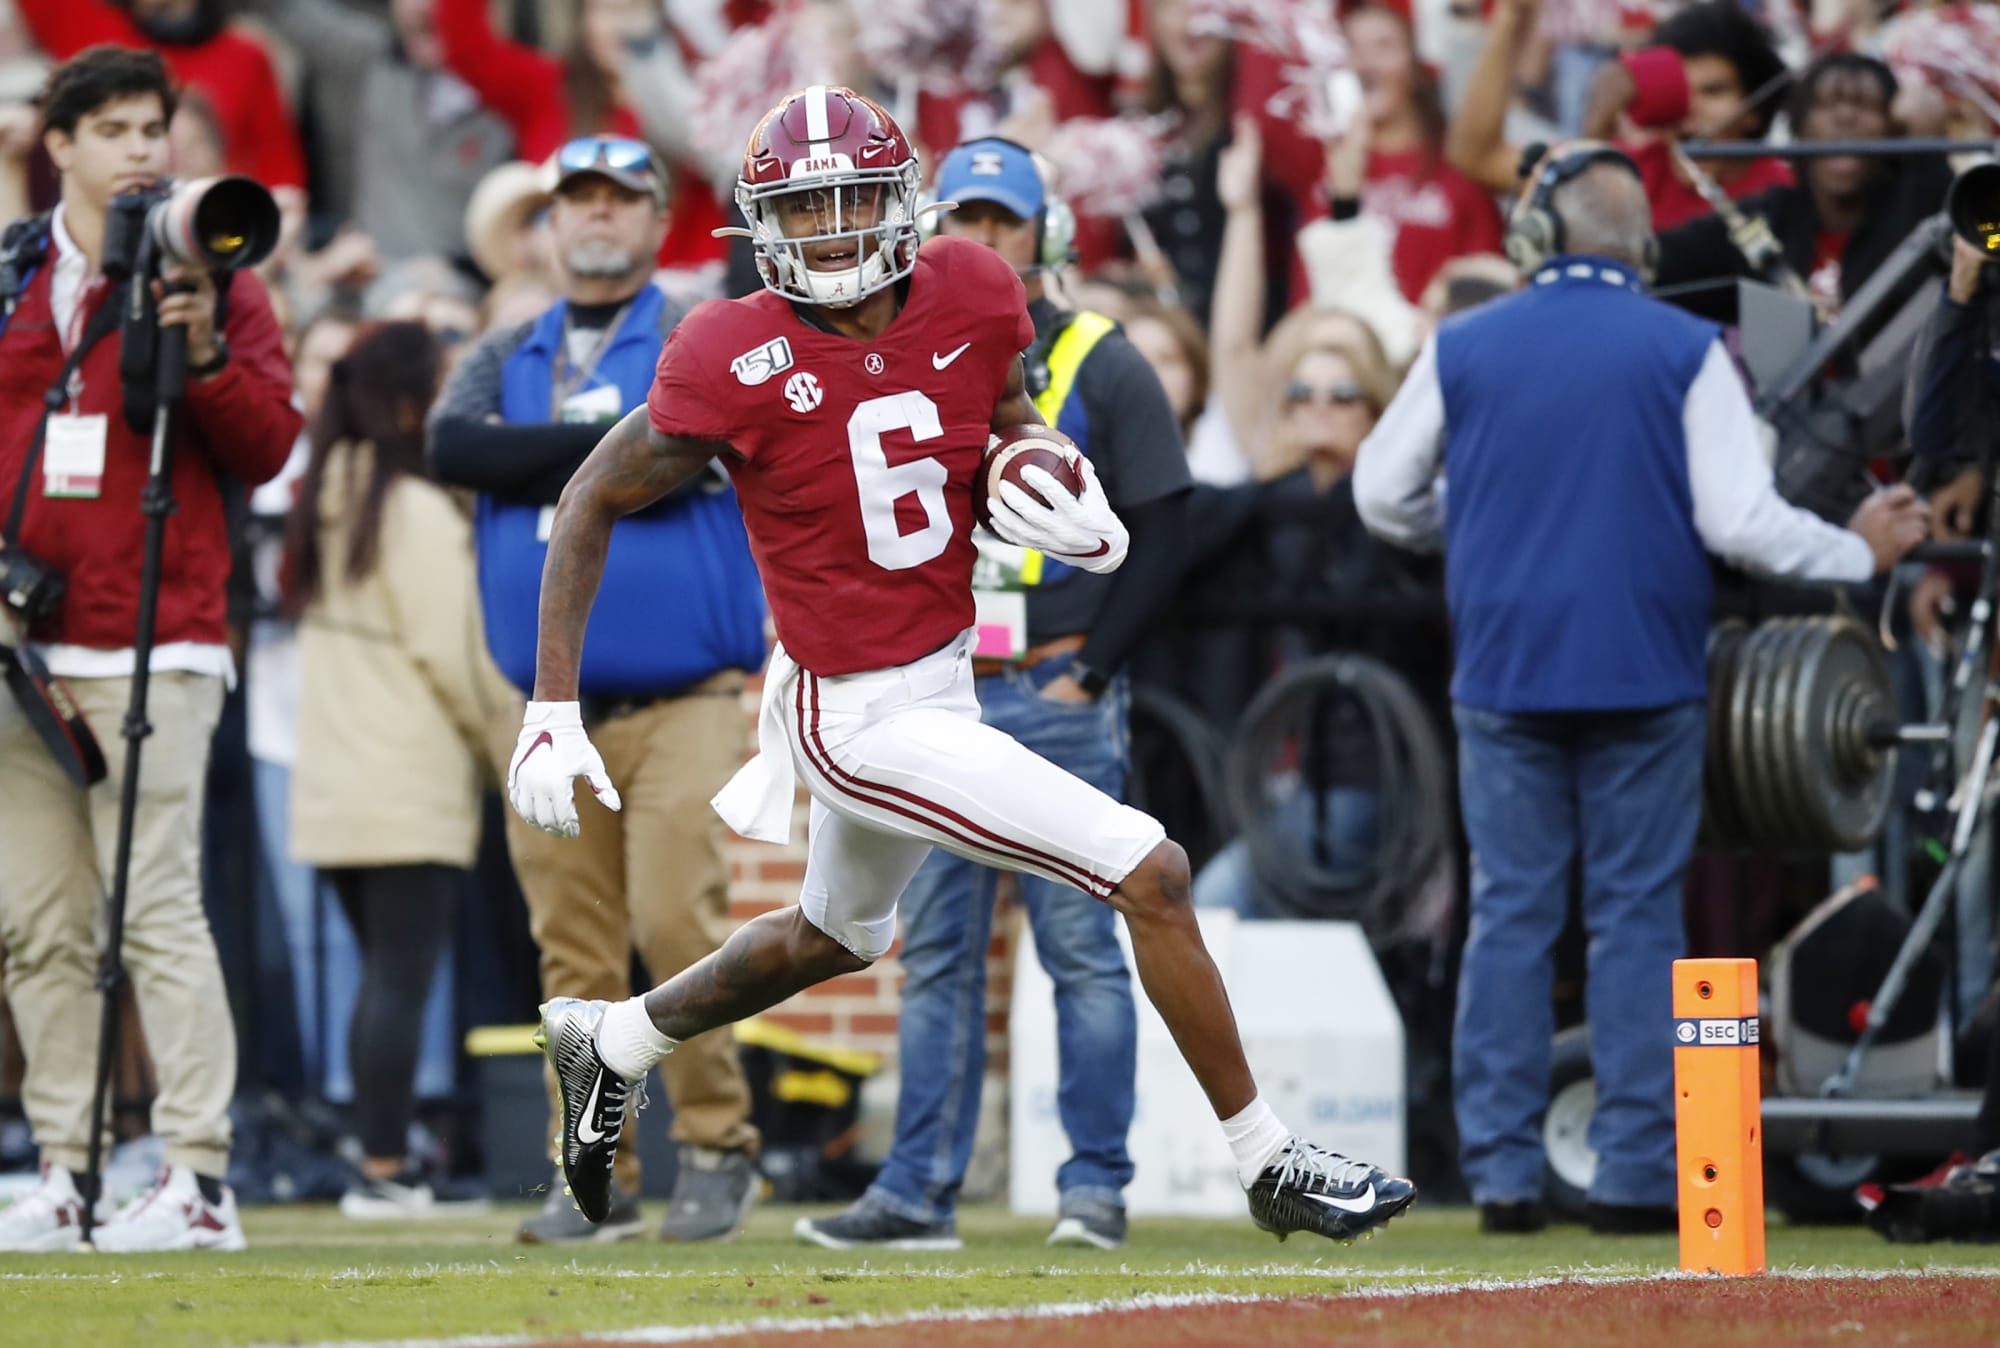 2020 NFL Draft: Devonta Smith would be smart to stay at Alabama